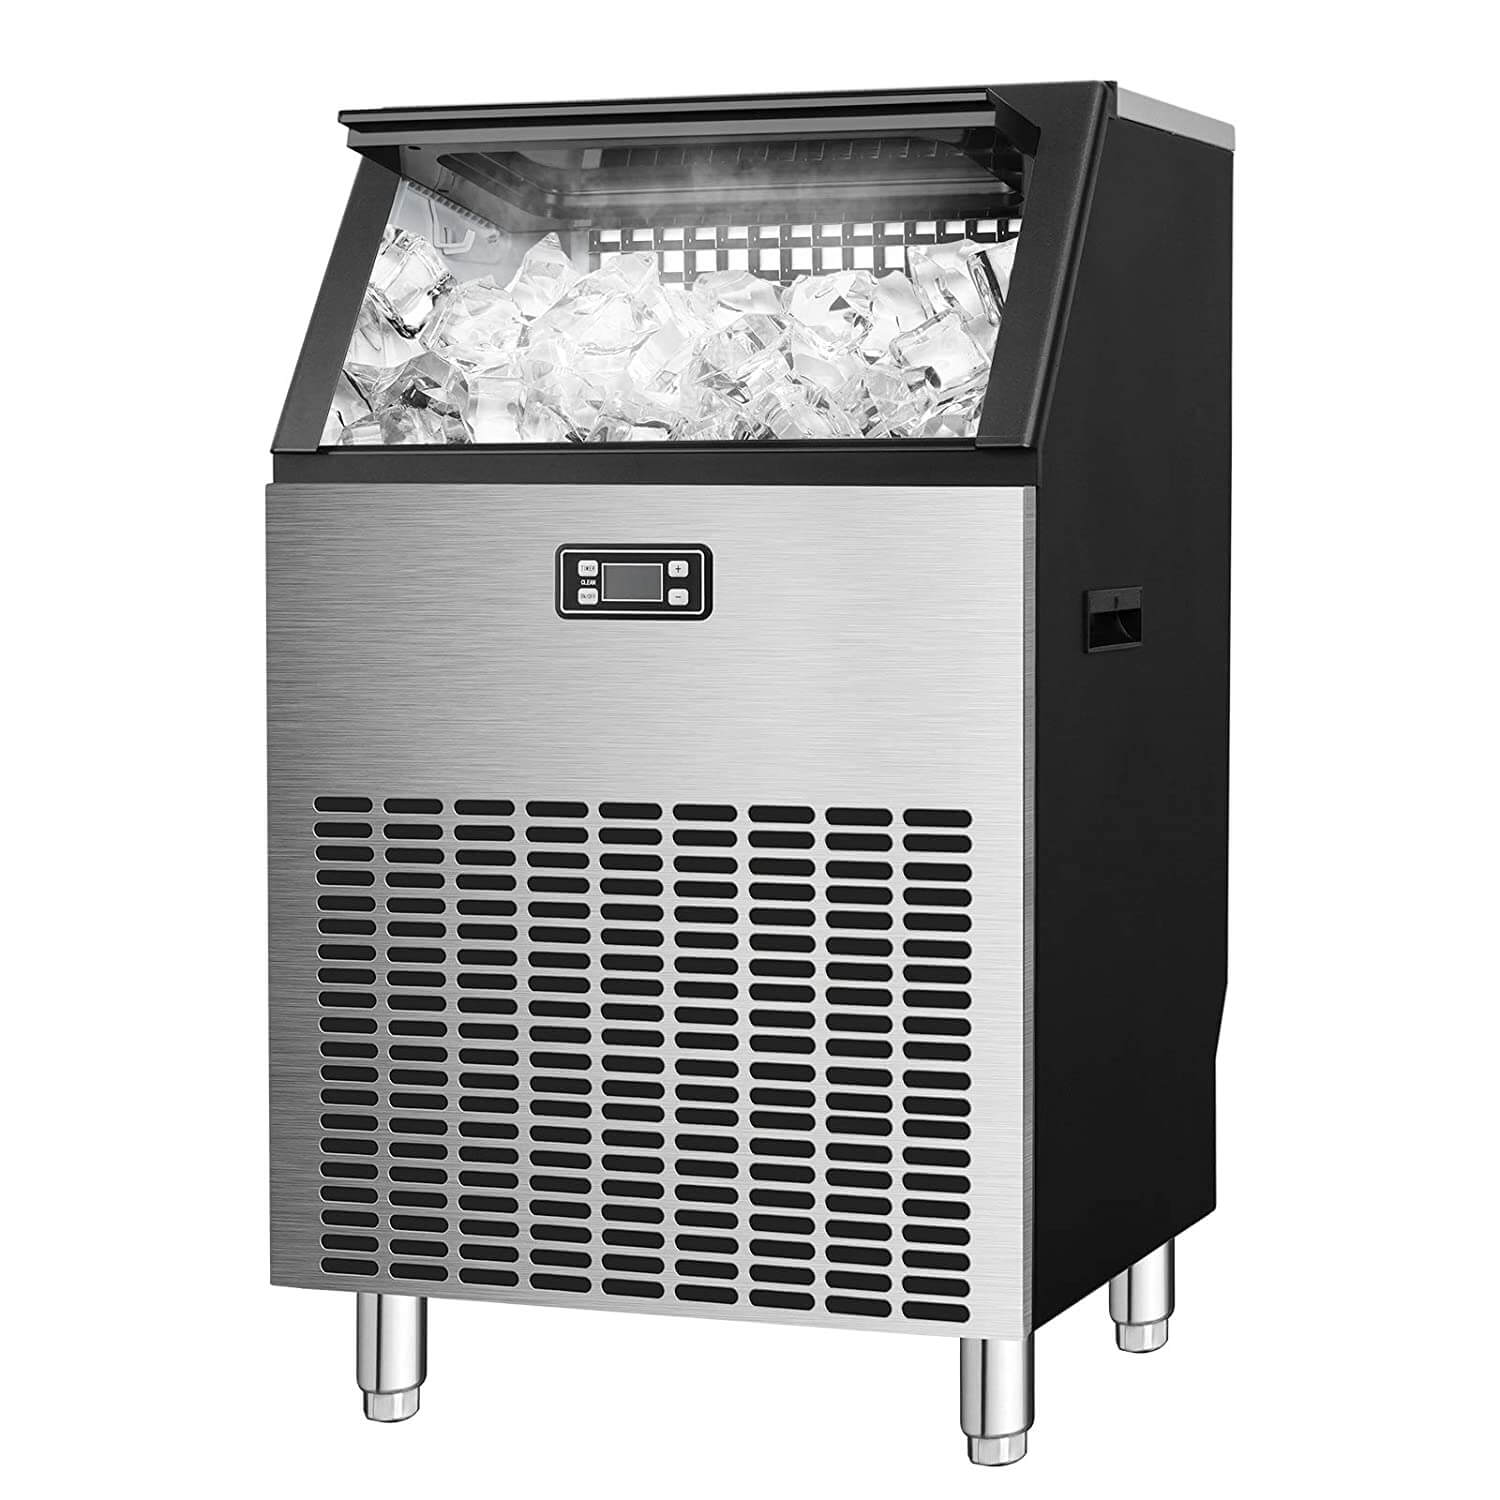 Ice Machines: The Must-Have Appliance for Luxury Entertainment